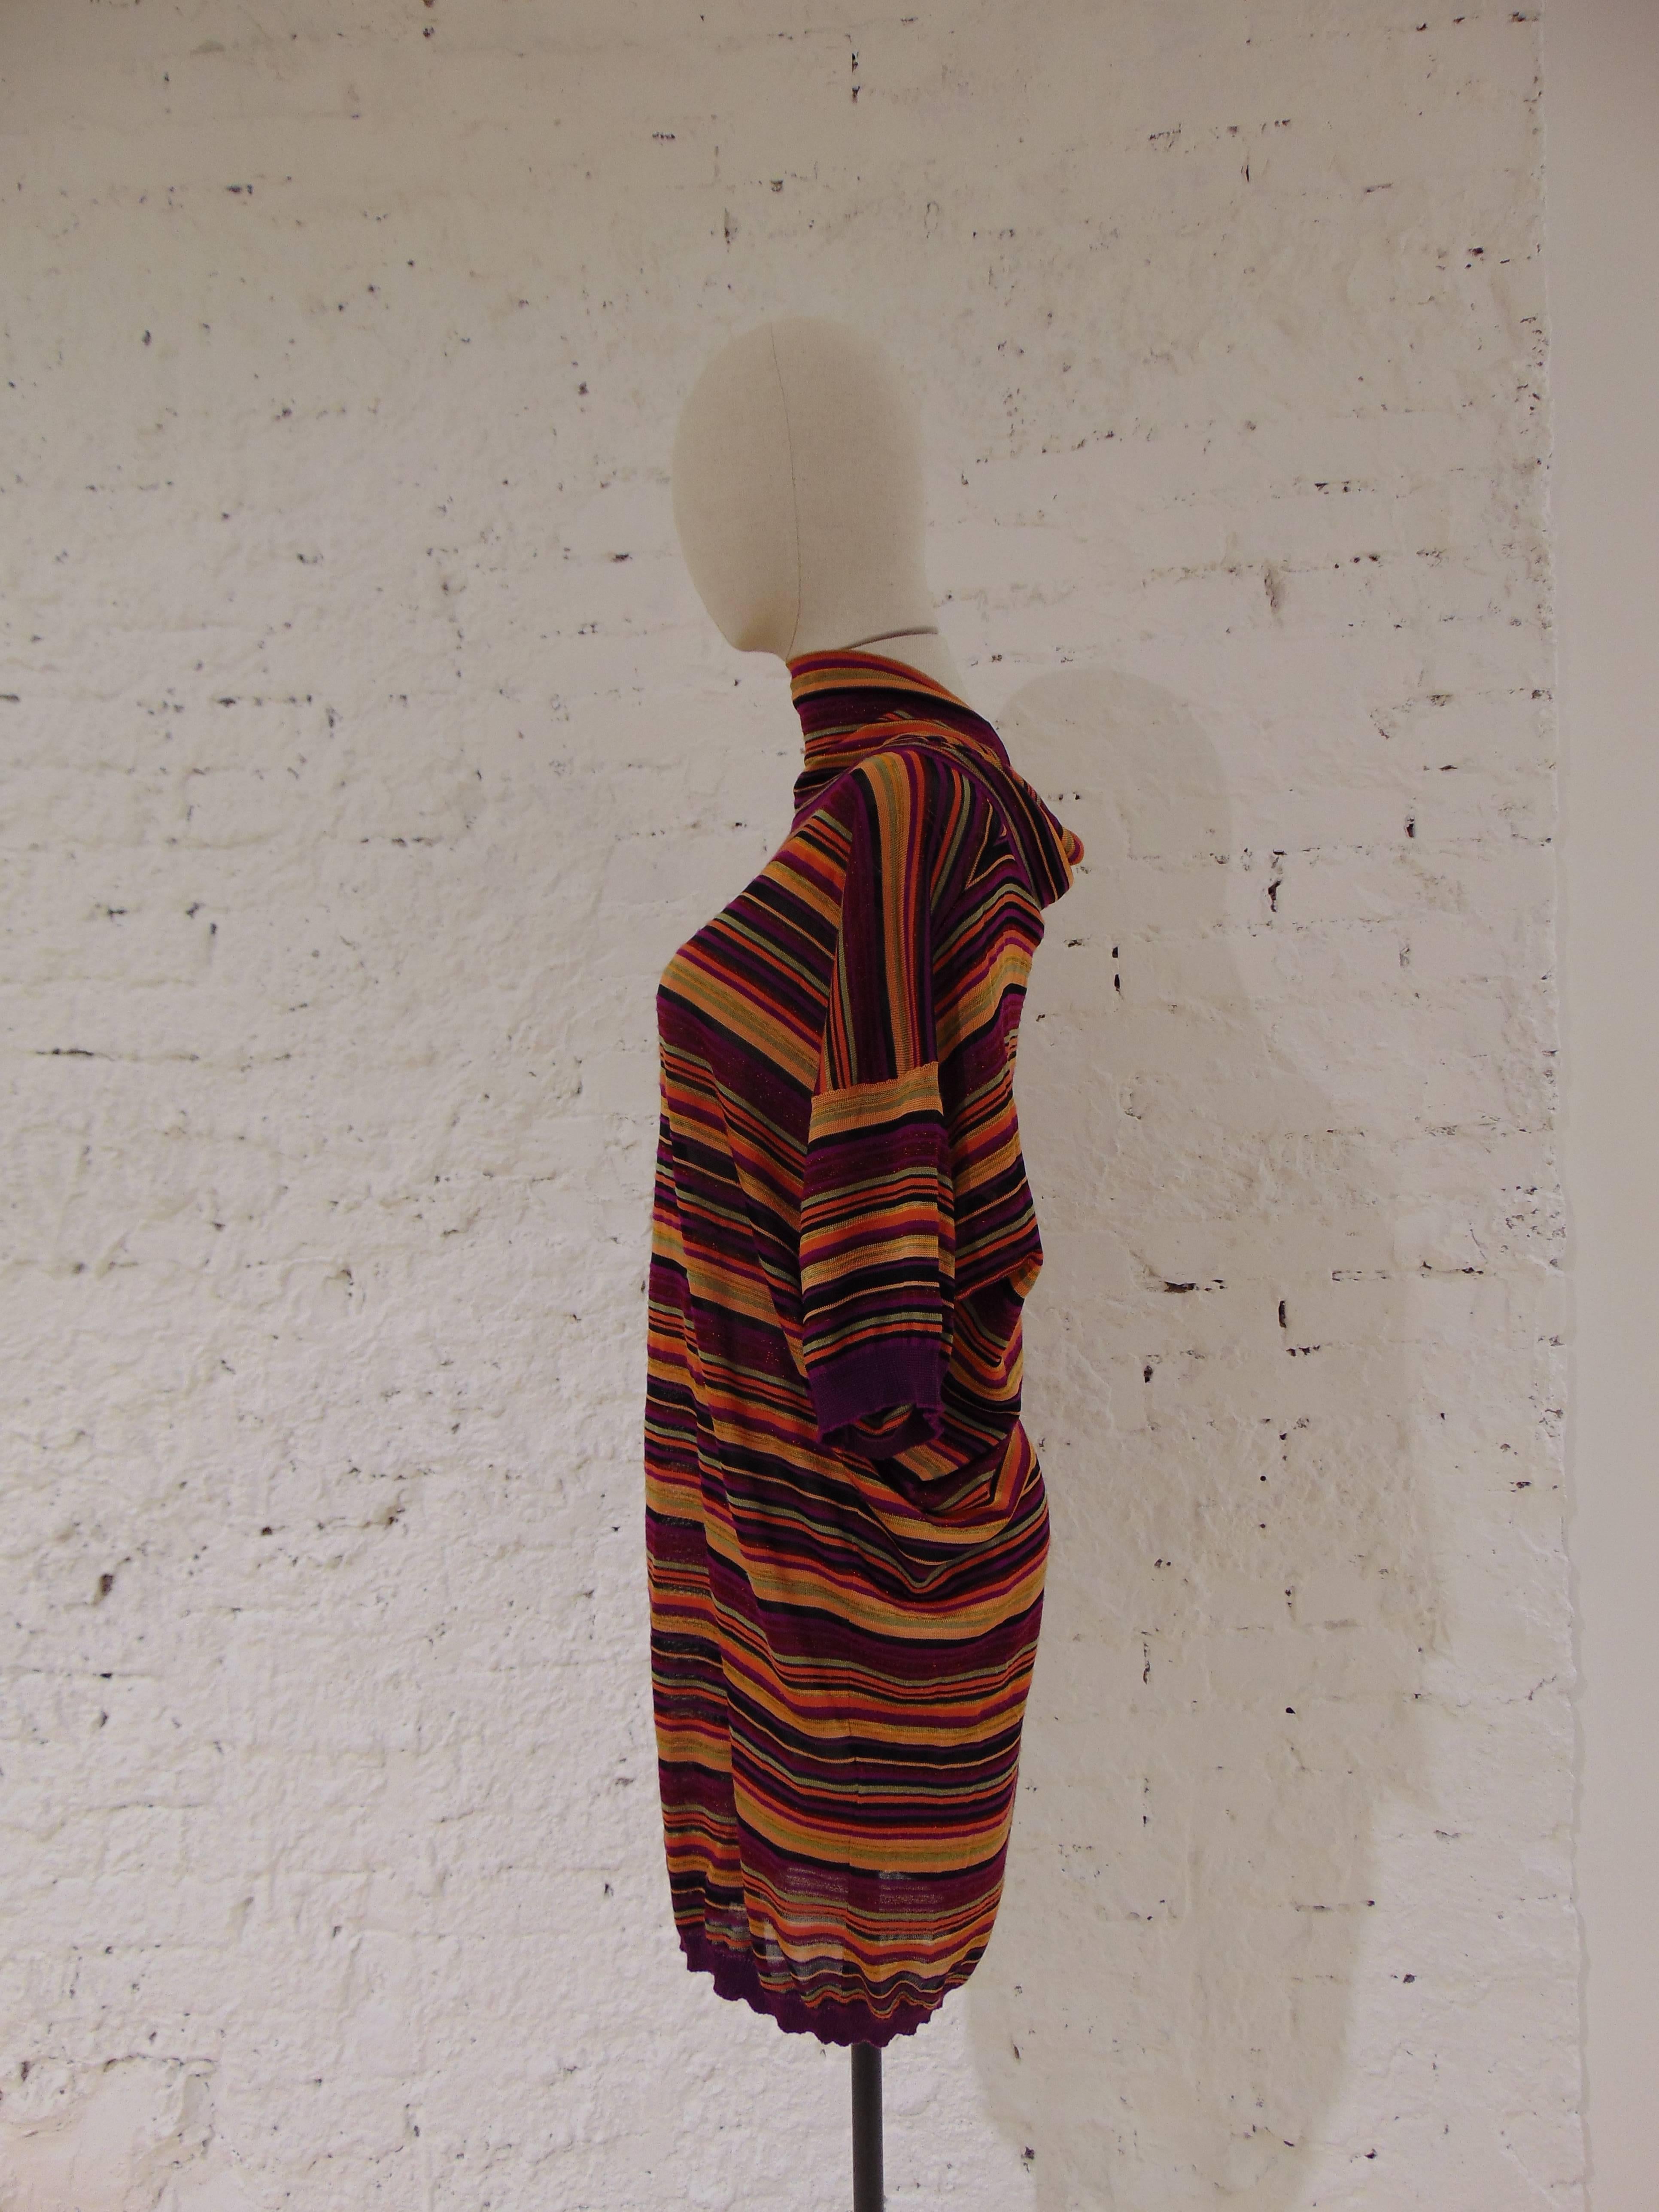 M by Missoni multicoloured cotton dress
totally made in italy in size 42